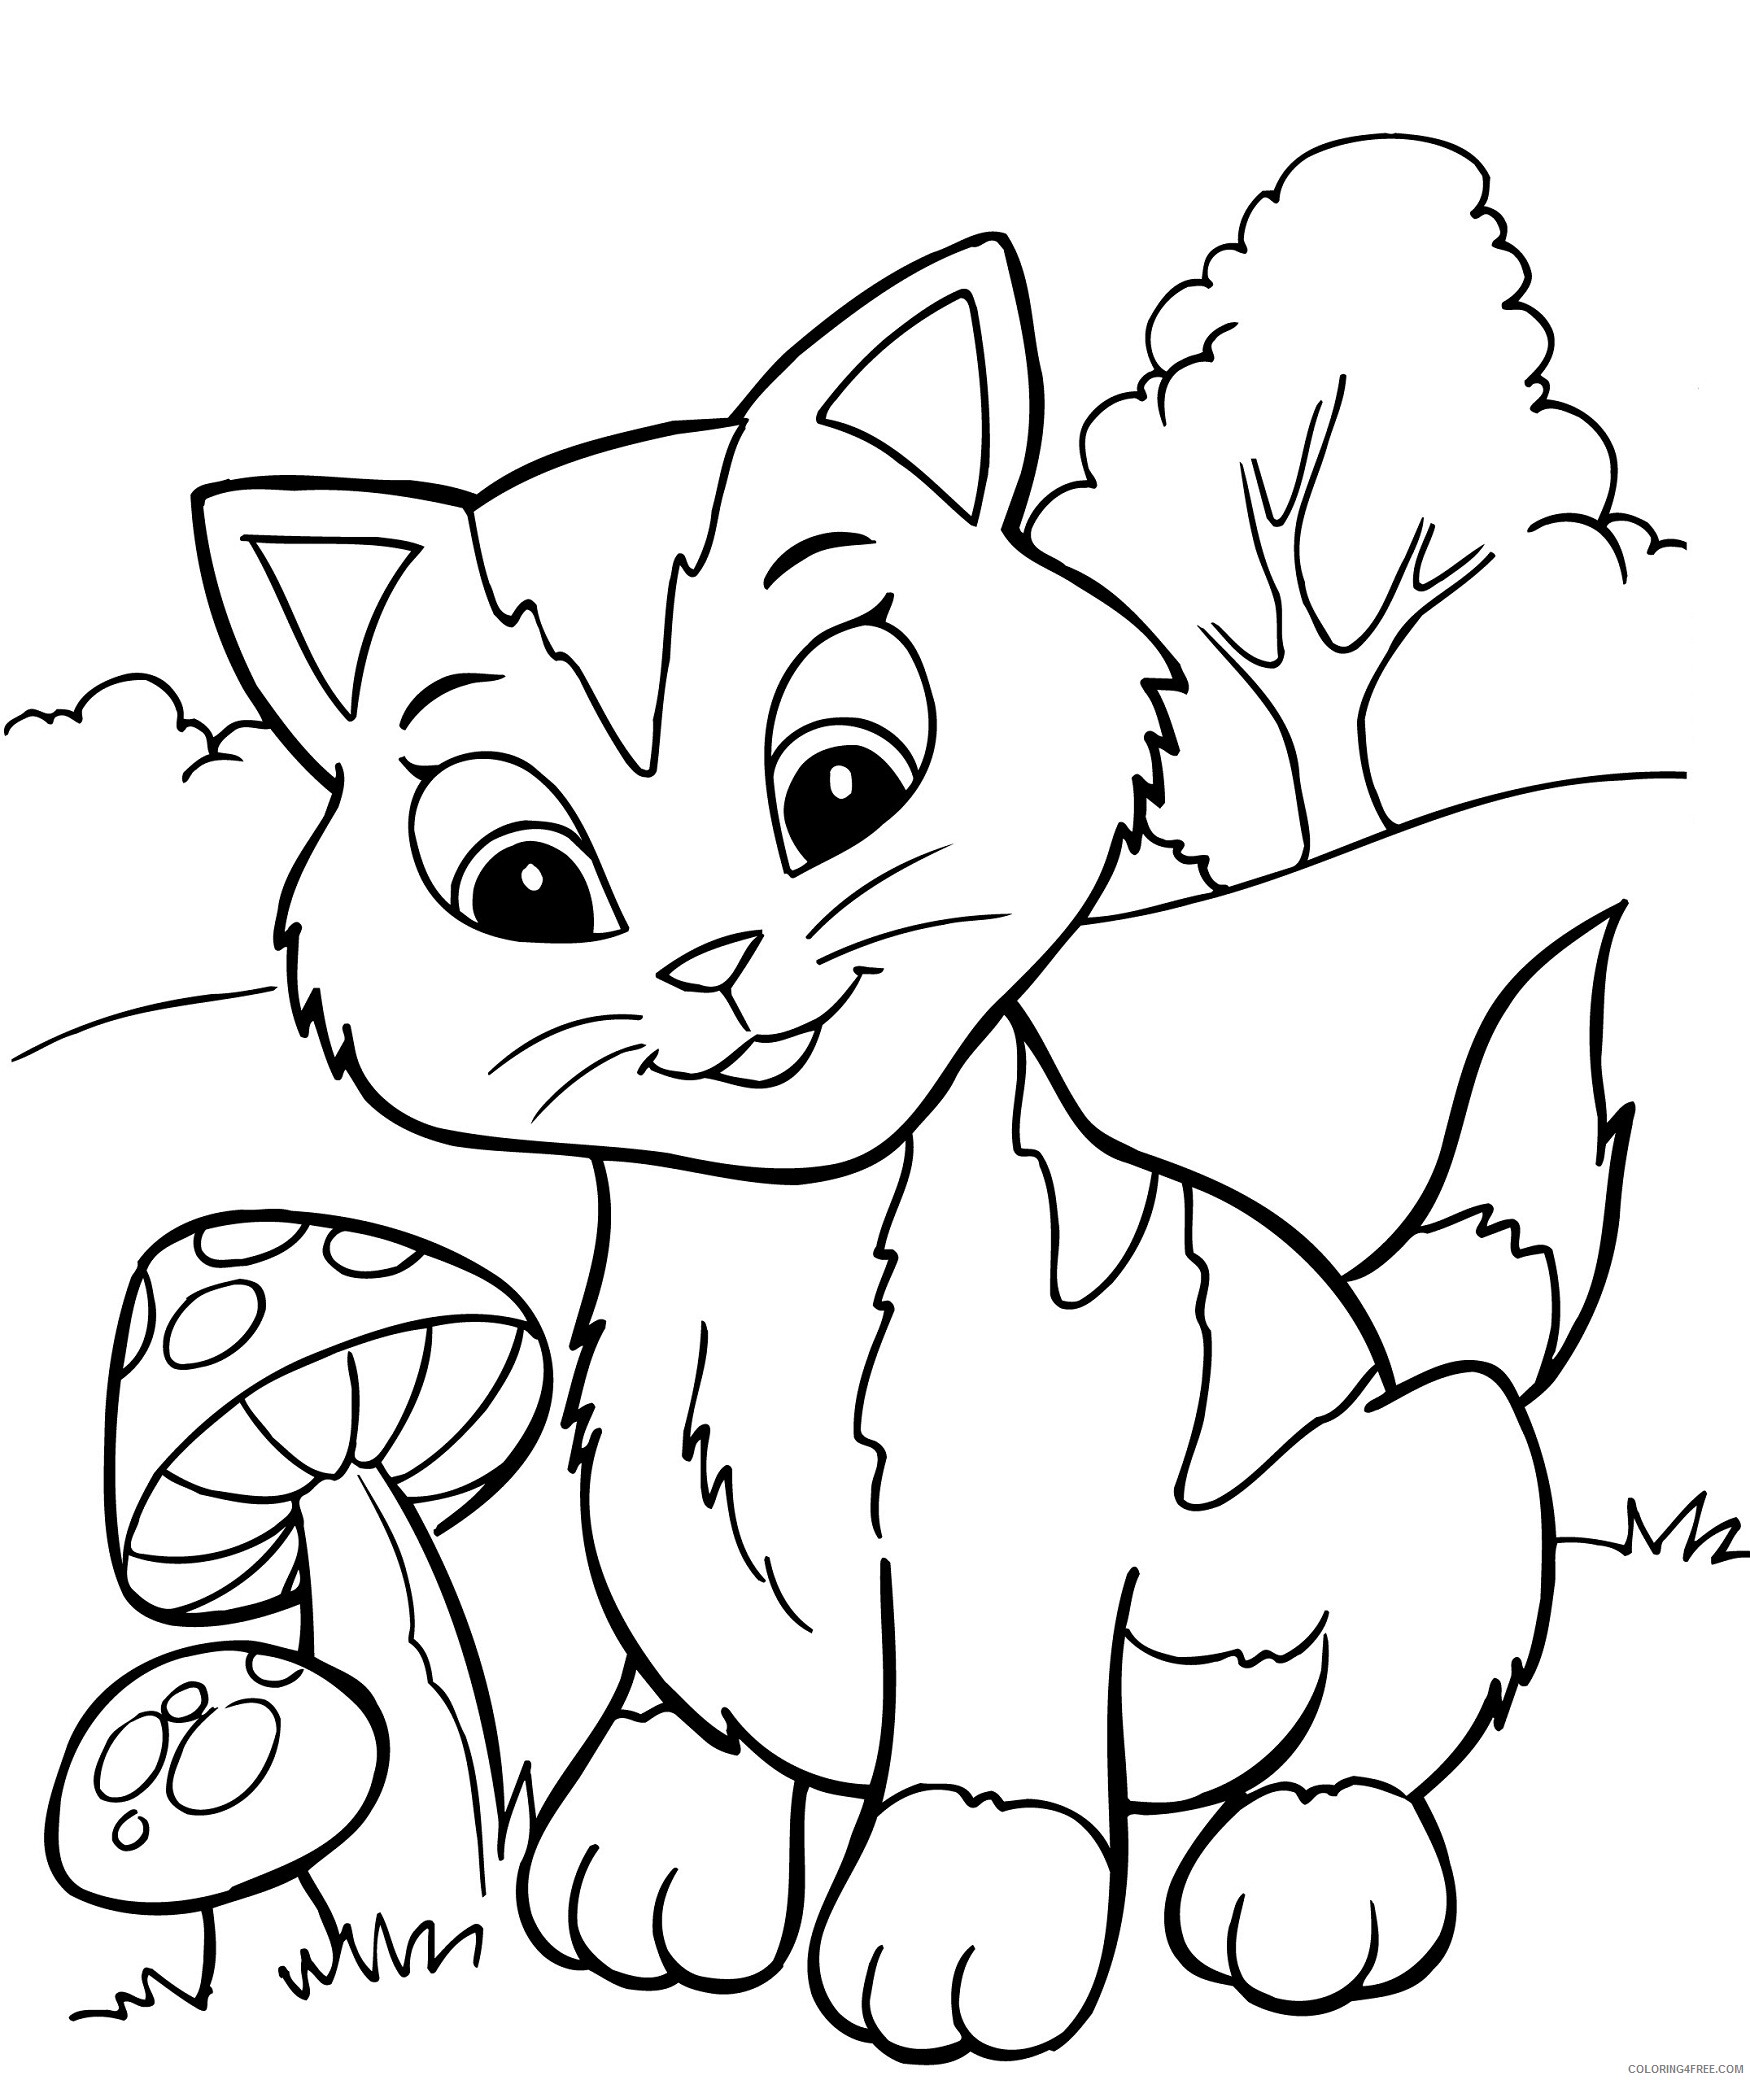 Kitten Coloring Pages Animal Printable Sheets kittens 2021 3013 Coloring4free